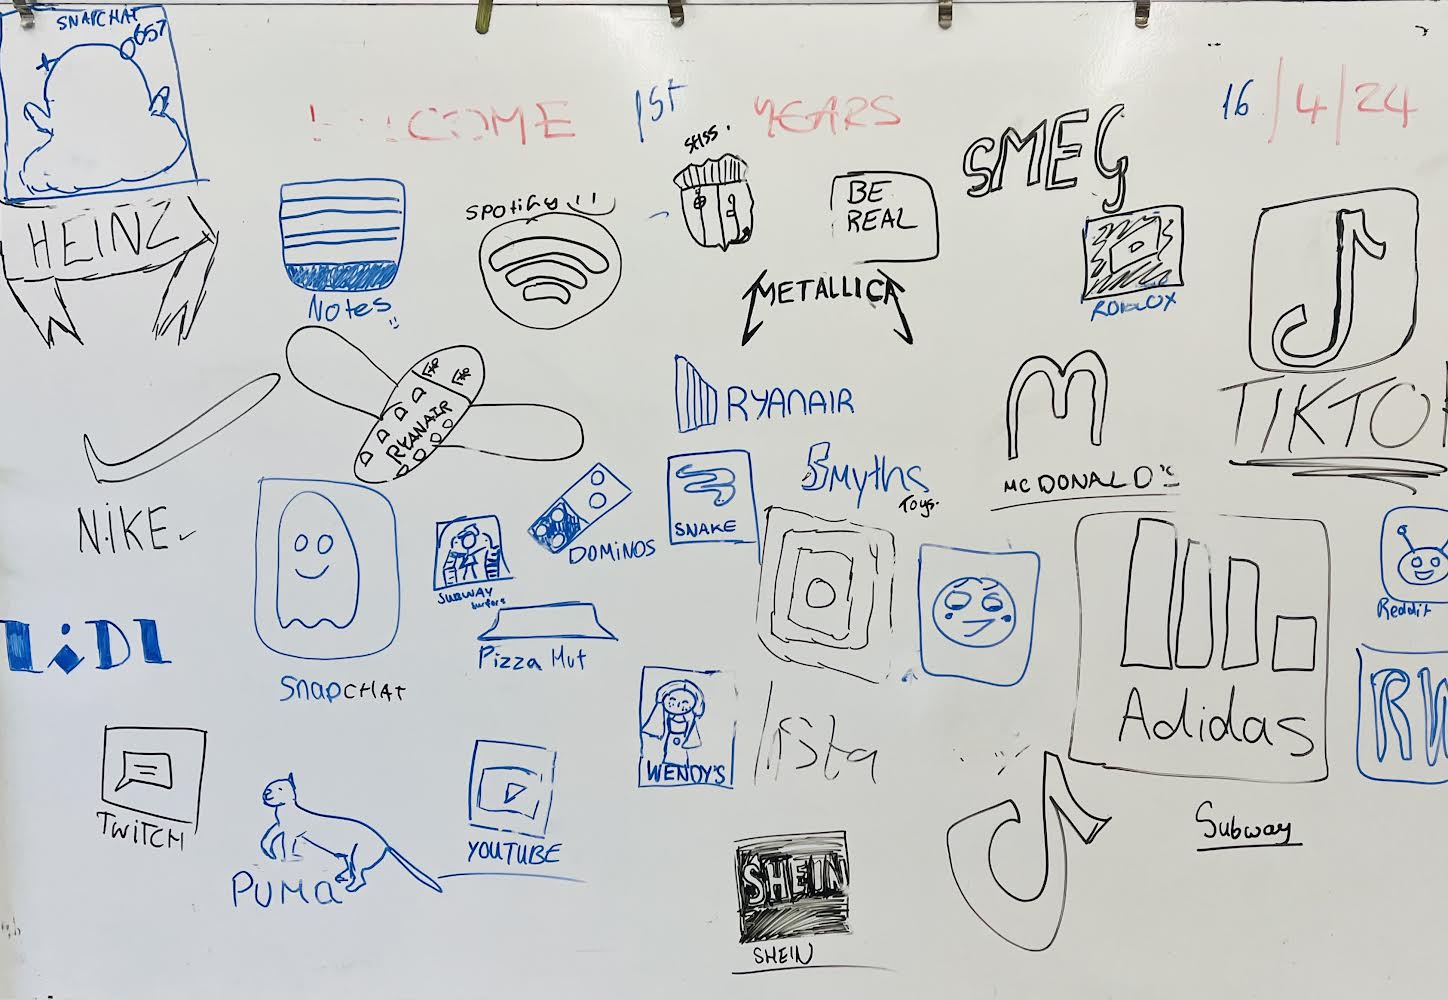 Logo design example drawn by the Art students on the whiteboard